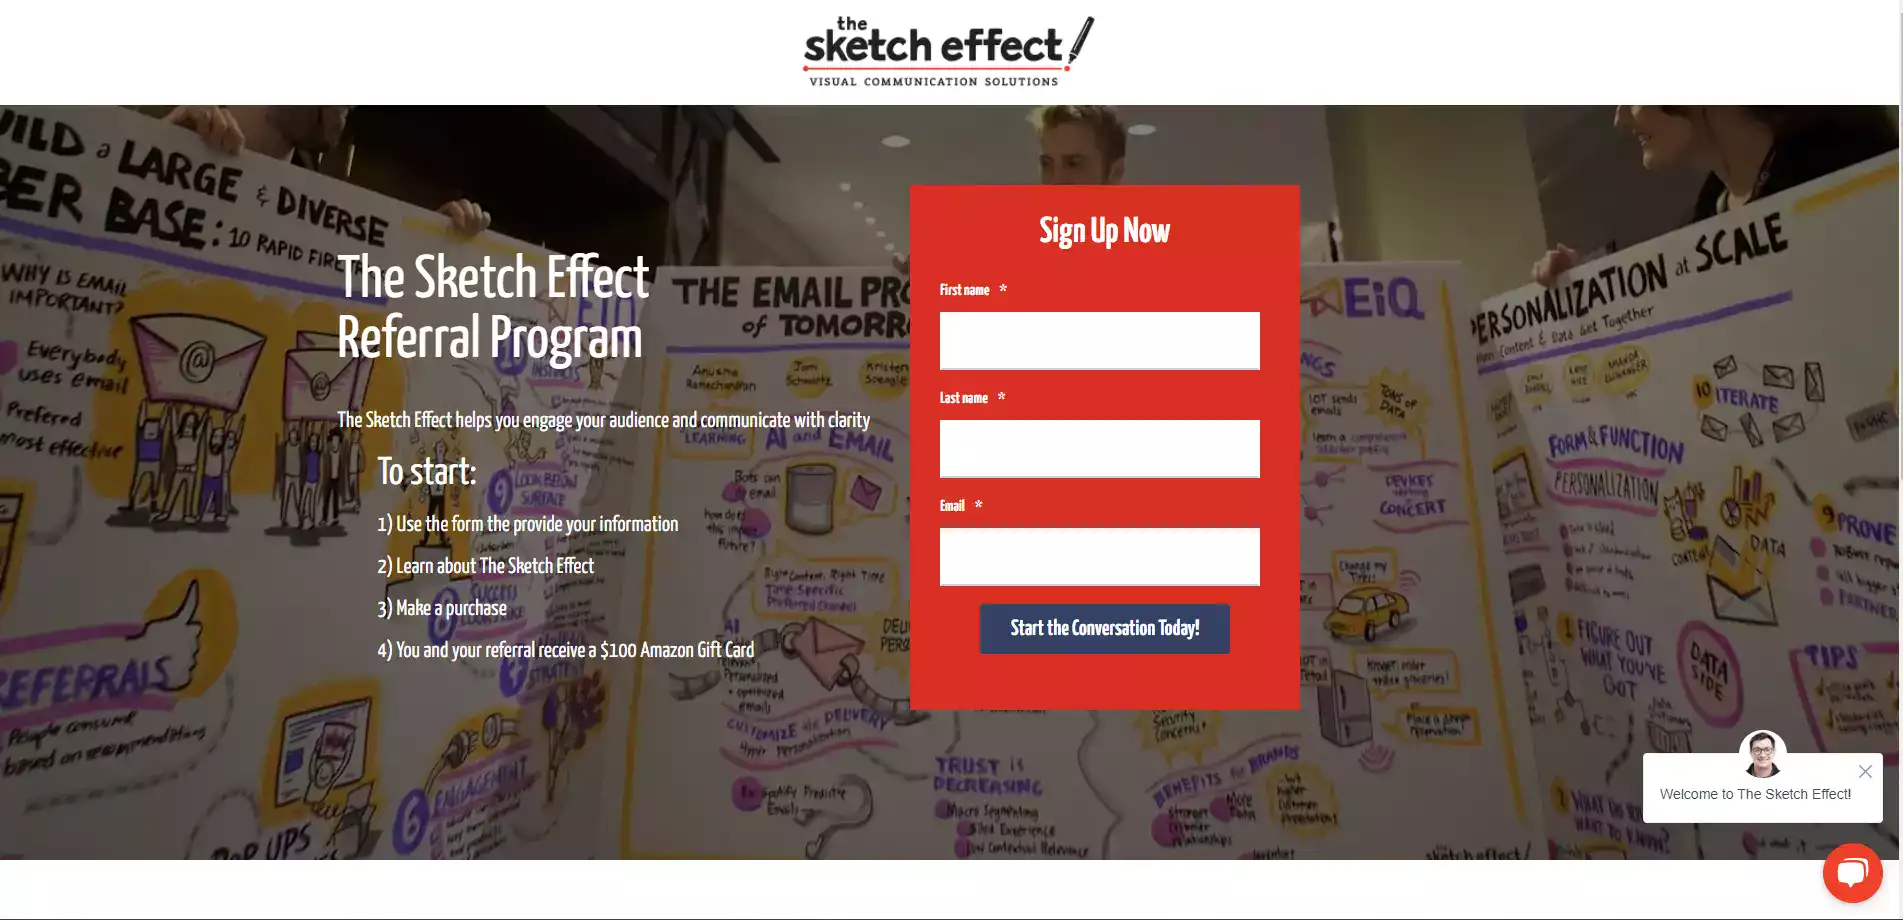 The Sketch Effect